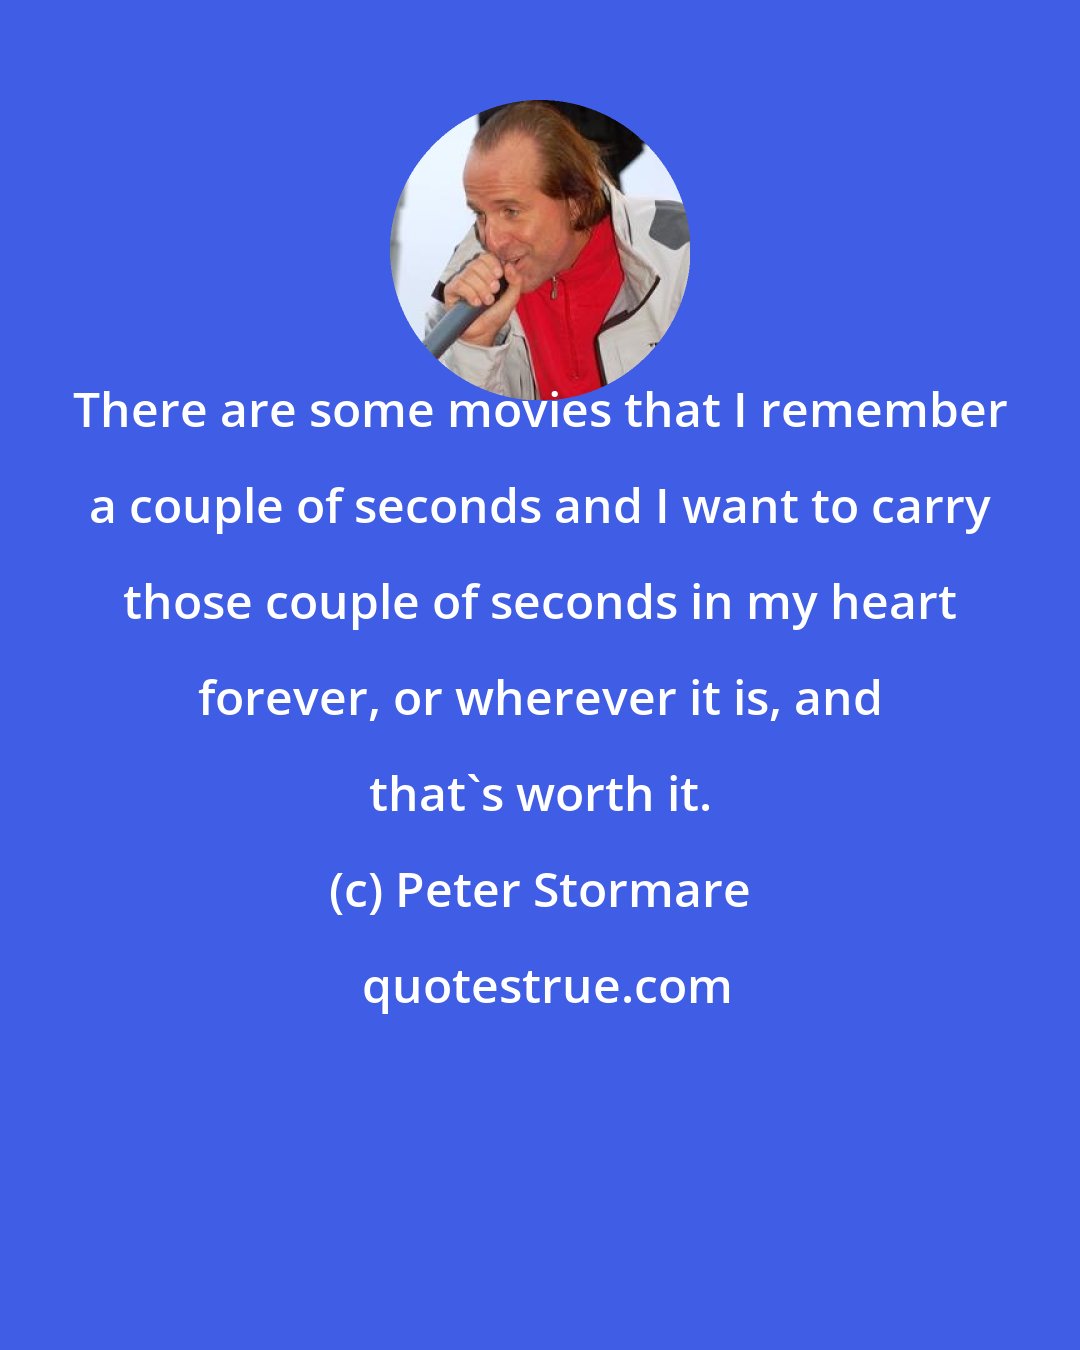 Peter Stormare: There are some movies that I remember a couple of seconds and I want to carry those couple of seconds in my heart forever, or wherever it is, and that's worth it.